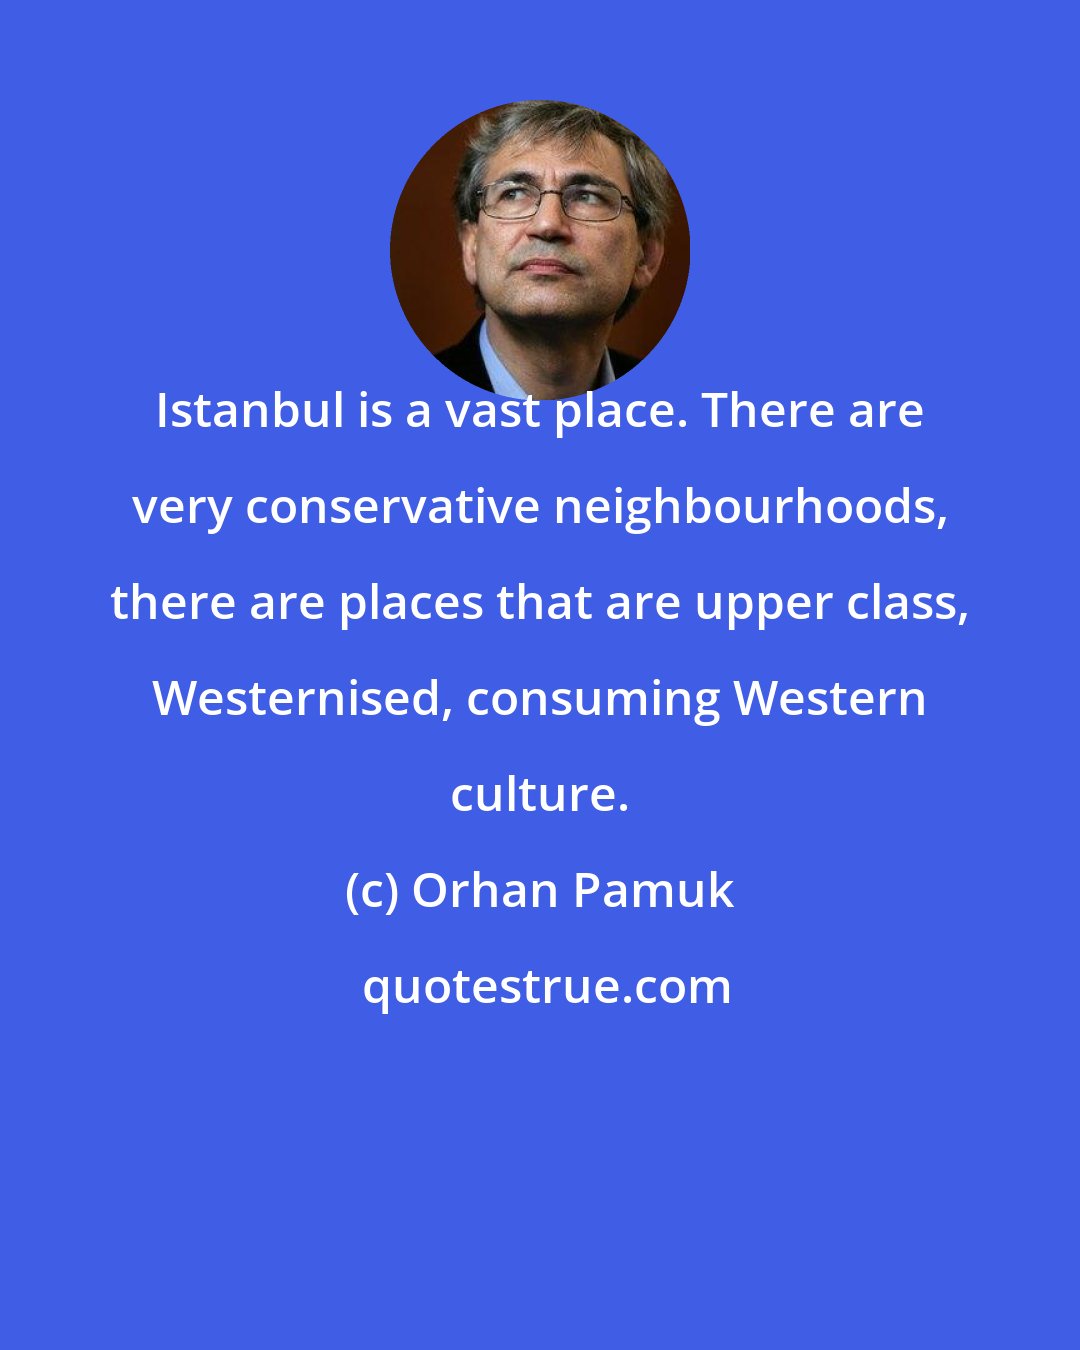 Orhan Pamuk: Istanbul is a vast place. There are very conservative neighbourhoods, there are places that are upper class, Westernised, consuming Western culture.